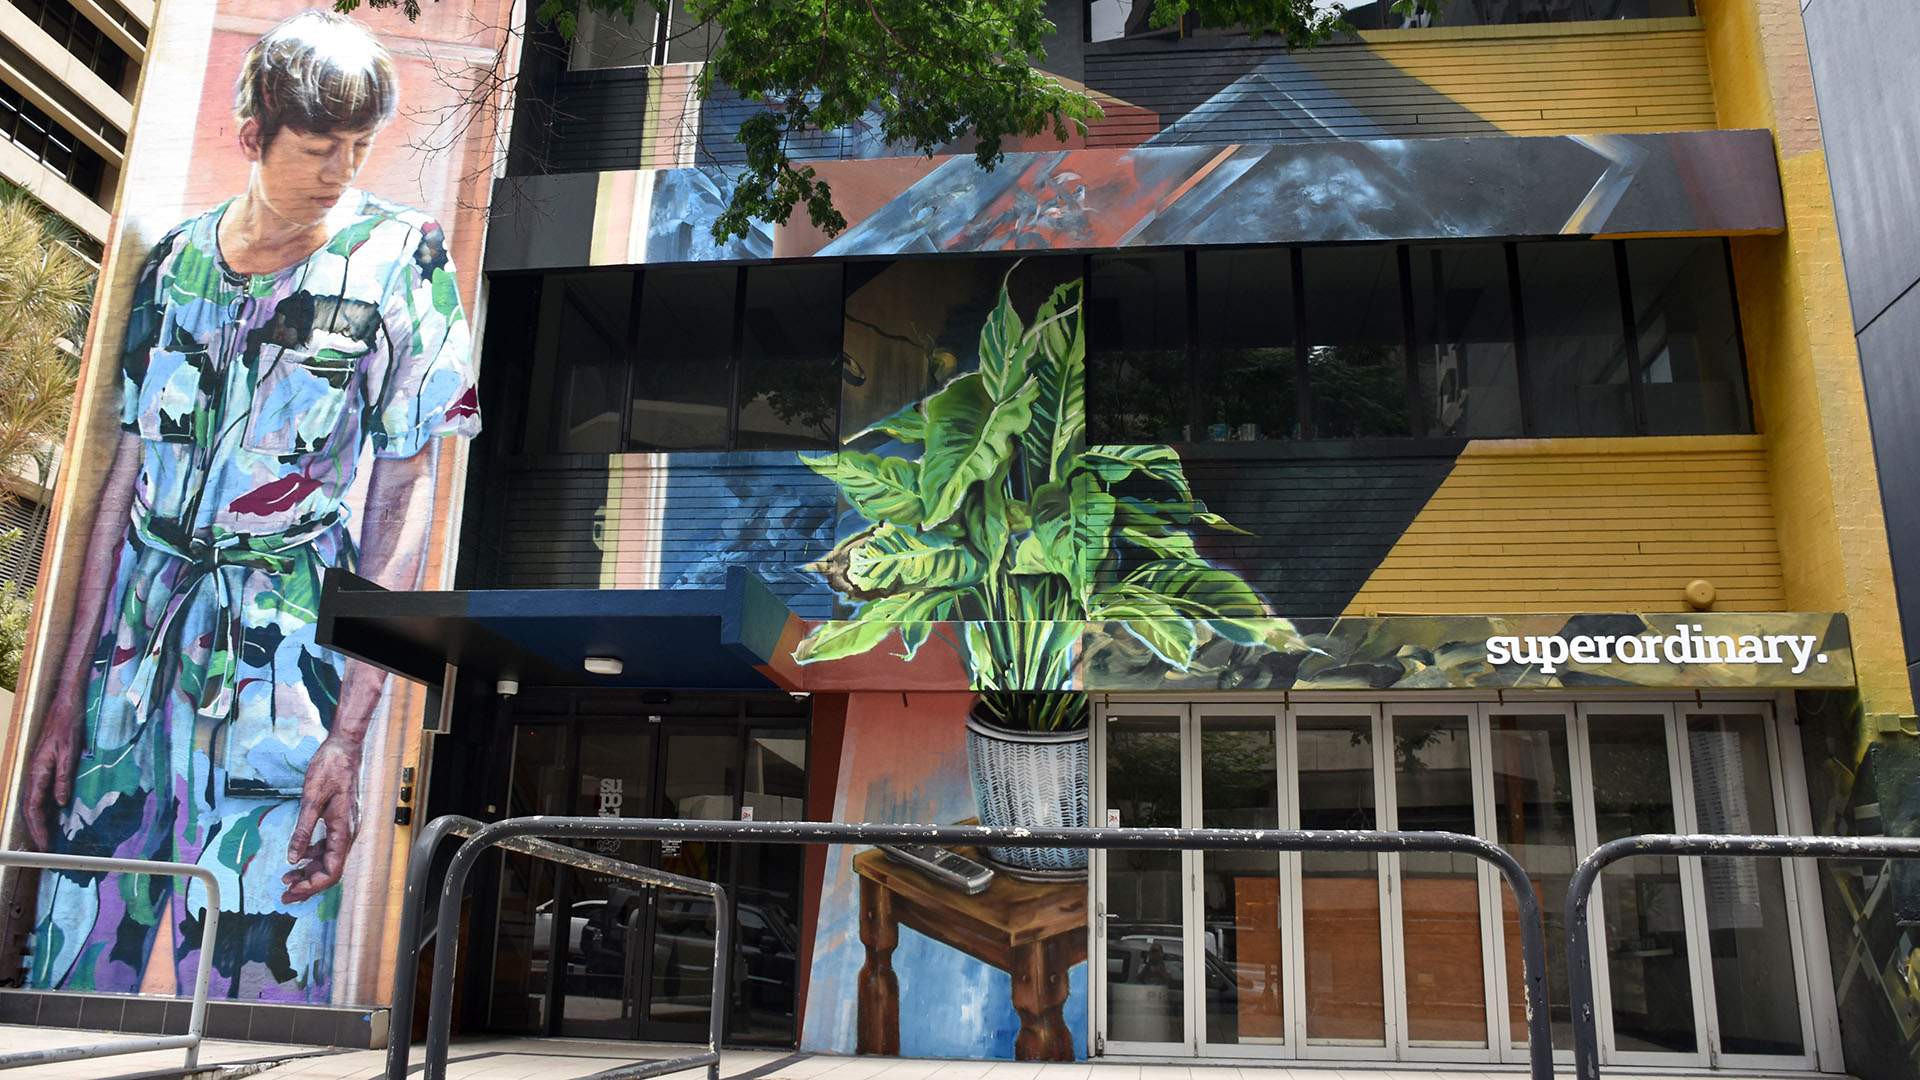 Brisbane's Citywide Street Art Festival Returns in May with 50 New Large-Scale Murals